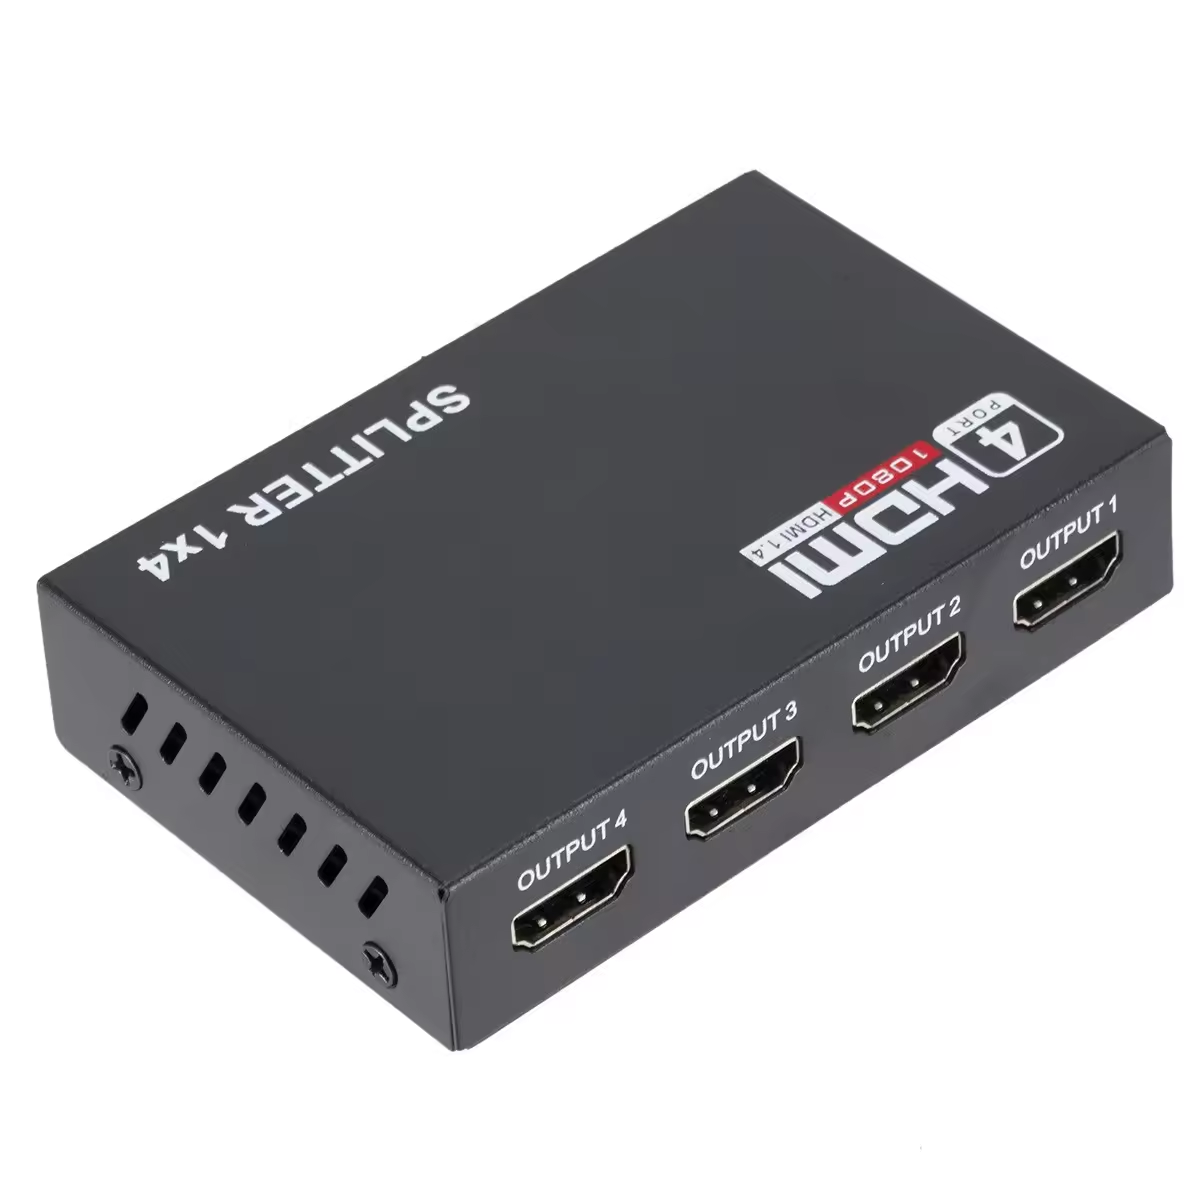 Amewire Wholesale Factory Price Full HD 3D 1080P 1 To 4 4K HDMI Splitter 1x4 4 Port hdmi splitter 1 in 4 out